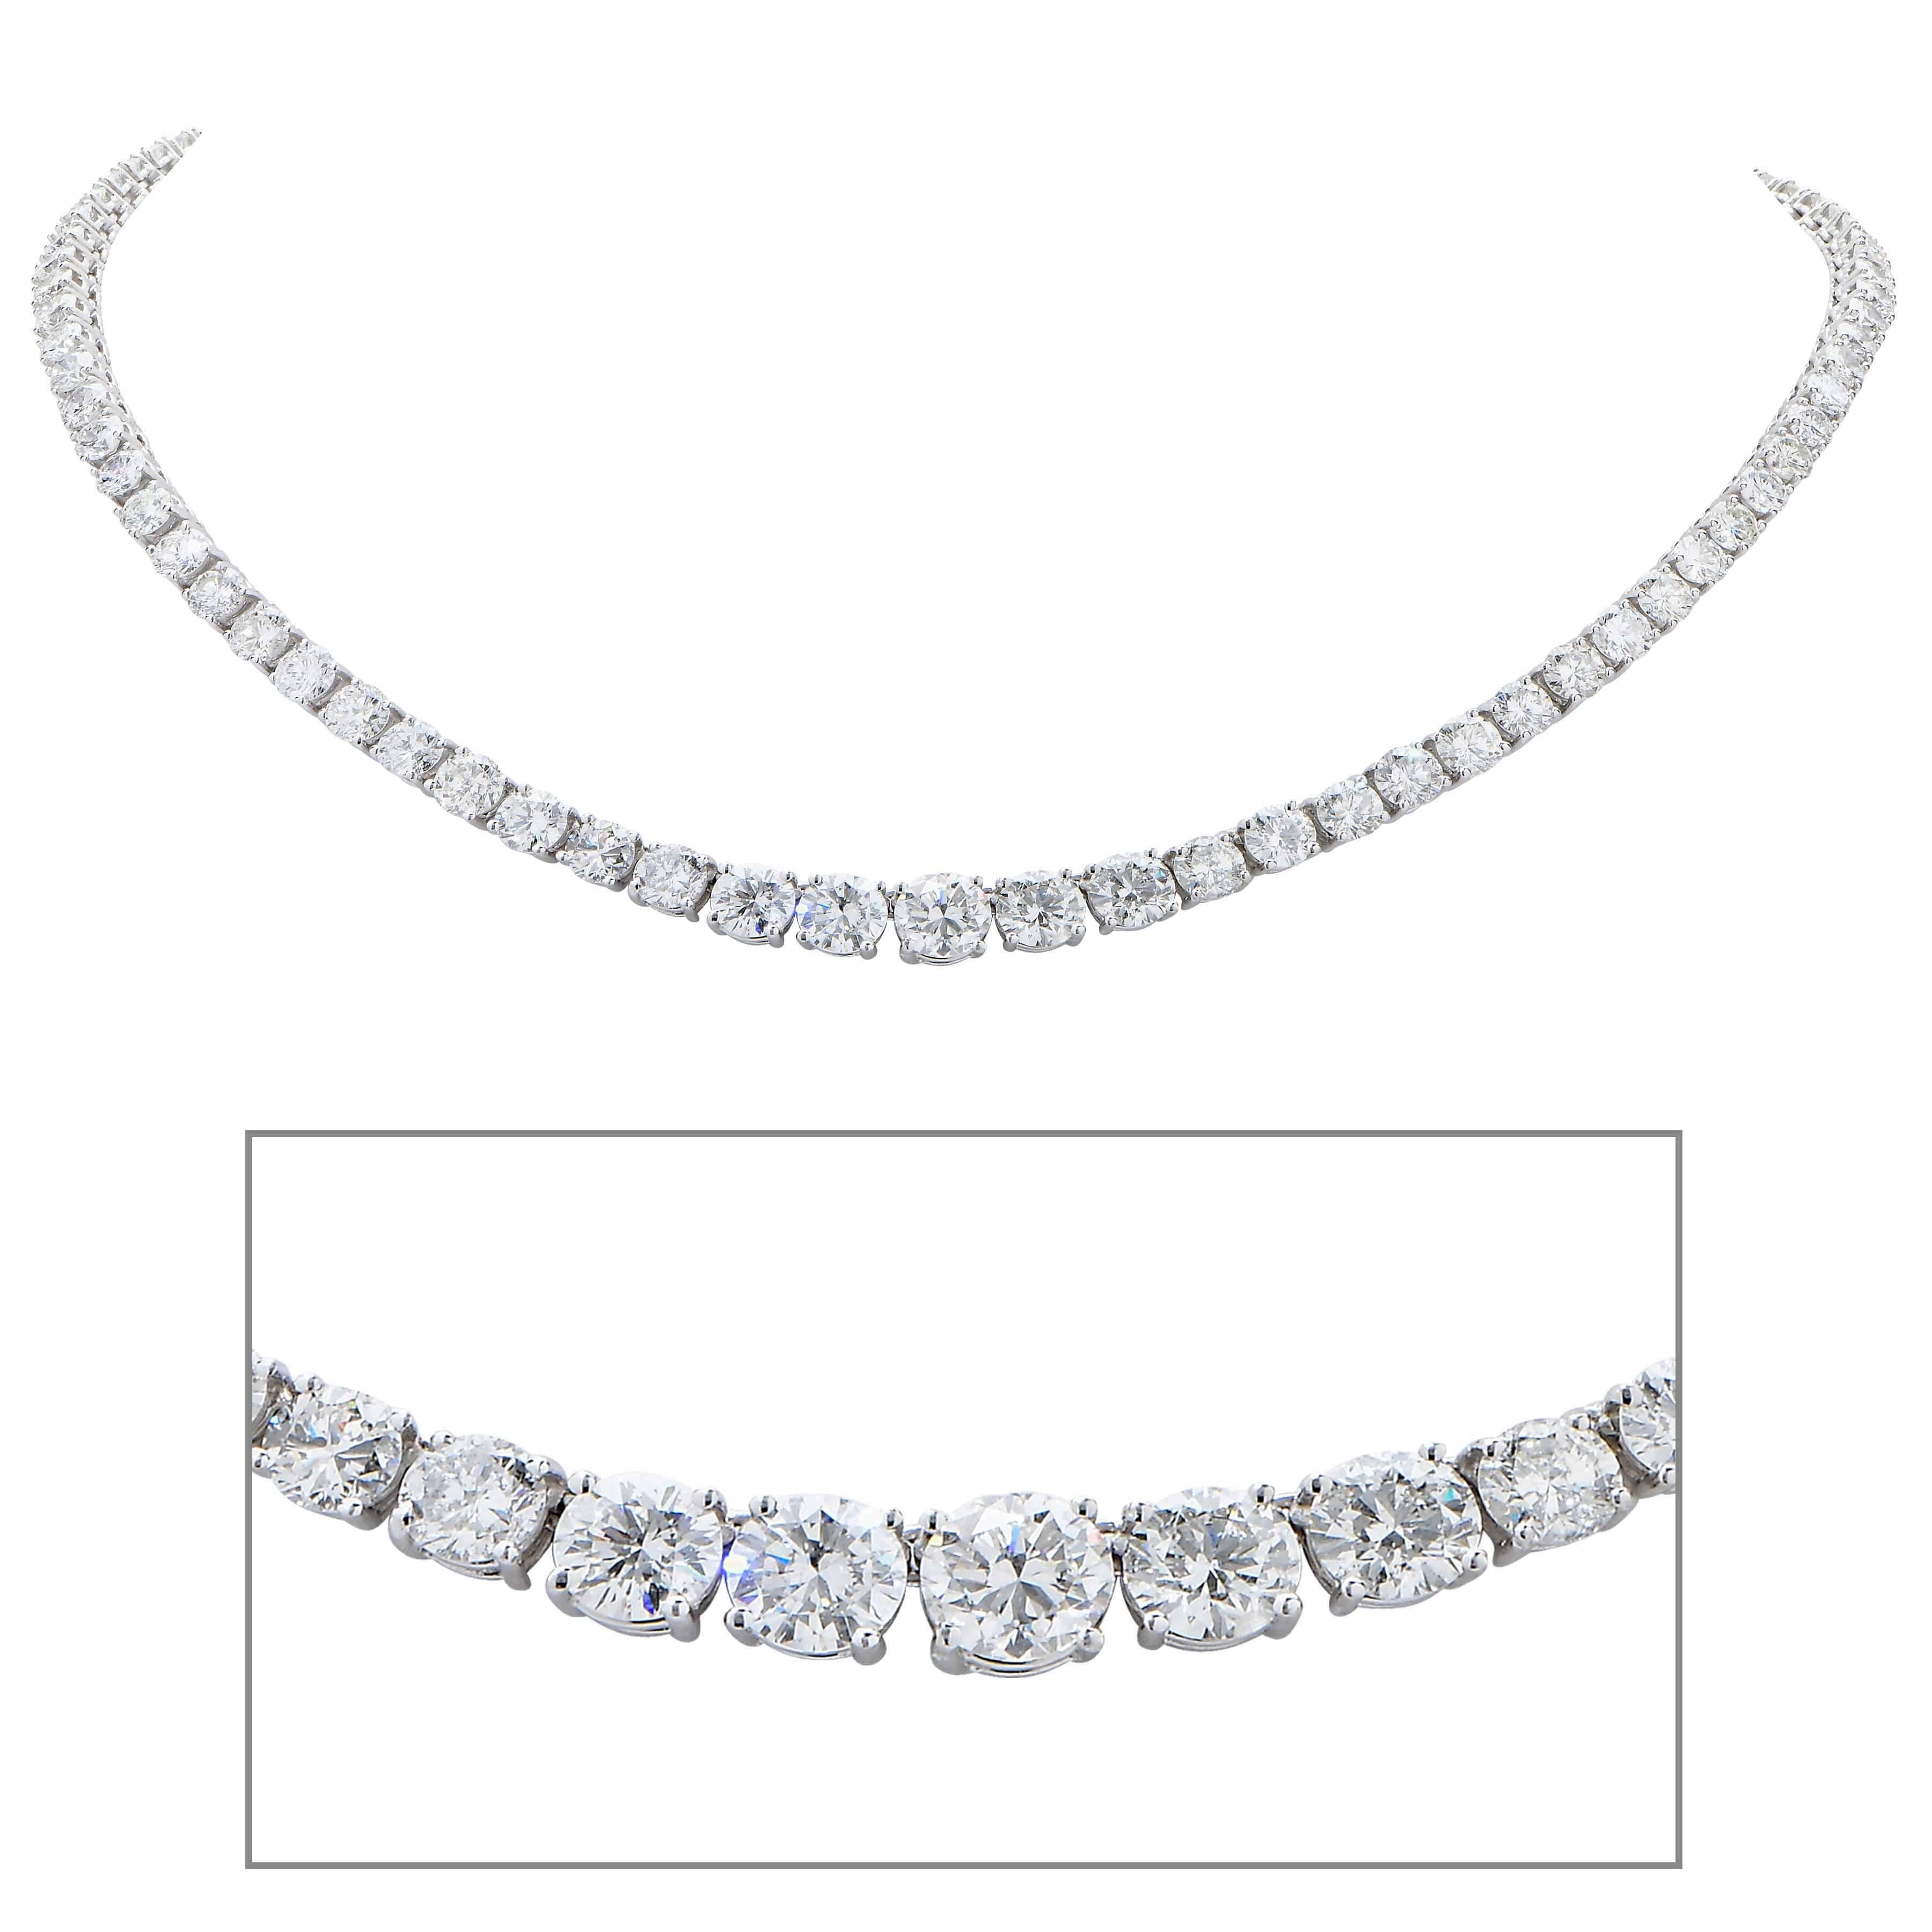 Platinum riviera necklace featuring 95 round brilliant cut diamonds with an estimated total weight of 24 carats and H/I color SI1-SI2 clarity. 
Necklace Length 15.5 inches. 
Metal: Platinum
Metal Weight: 34.8 Grams
